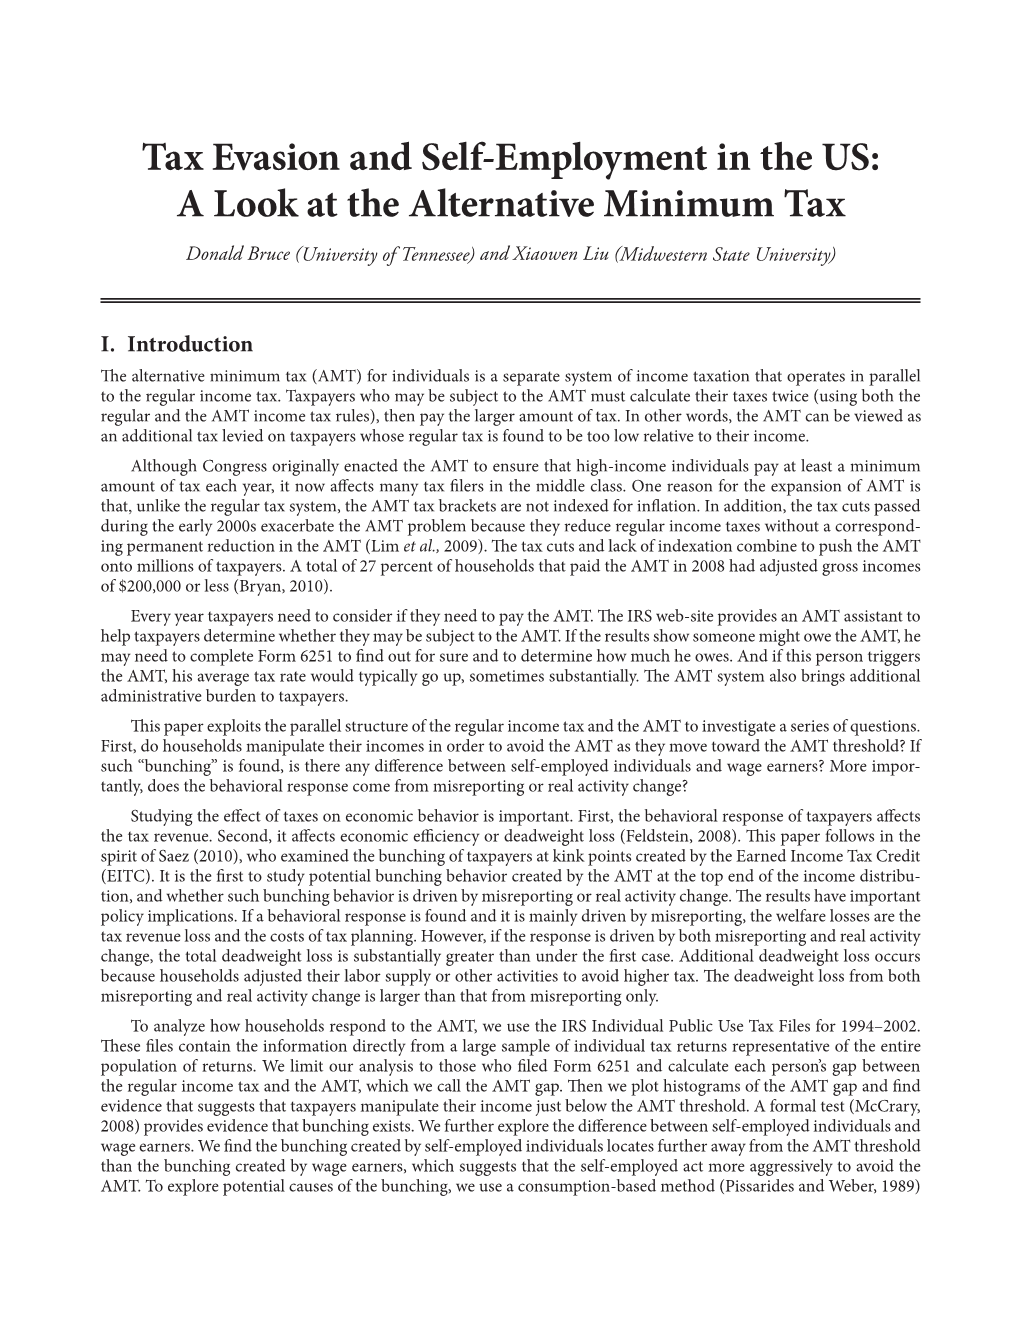 Tax Evasion and Self-Employment in the US: a Look at the Alternative Minimum Tax Donald Bruce (University of Tennessee) and Xiaowen Liu (Midwestern State University)